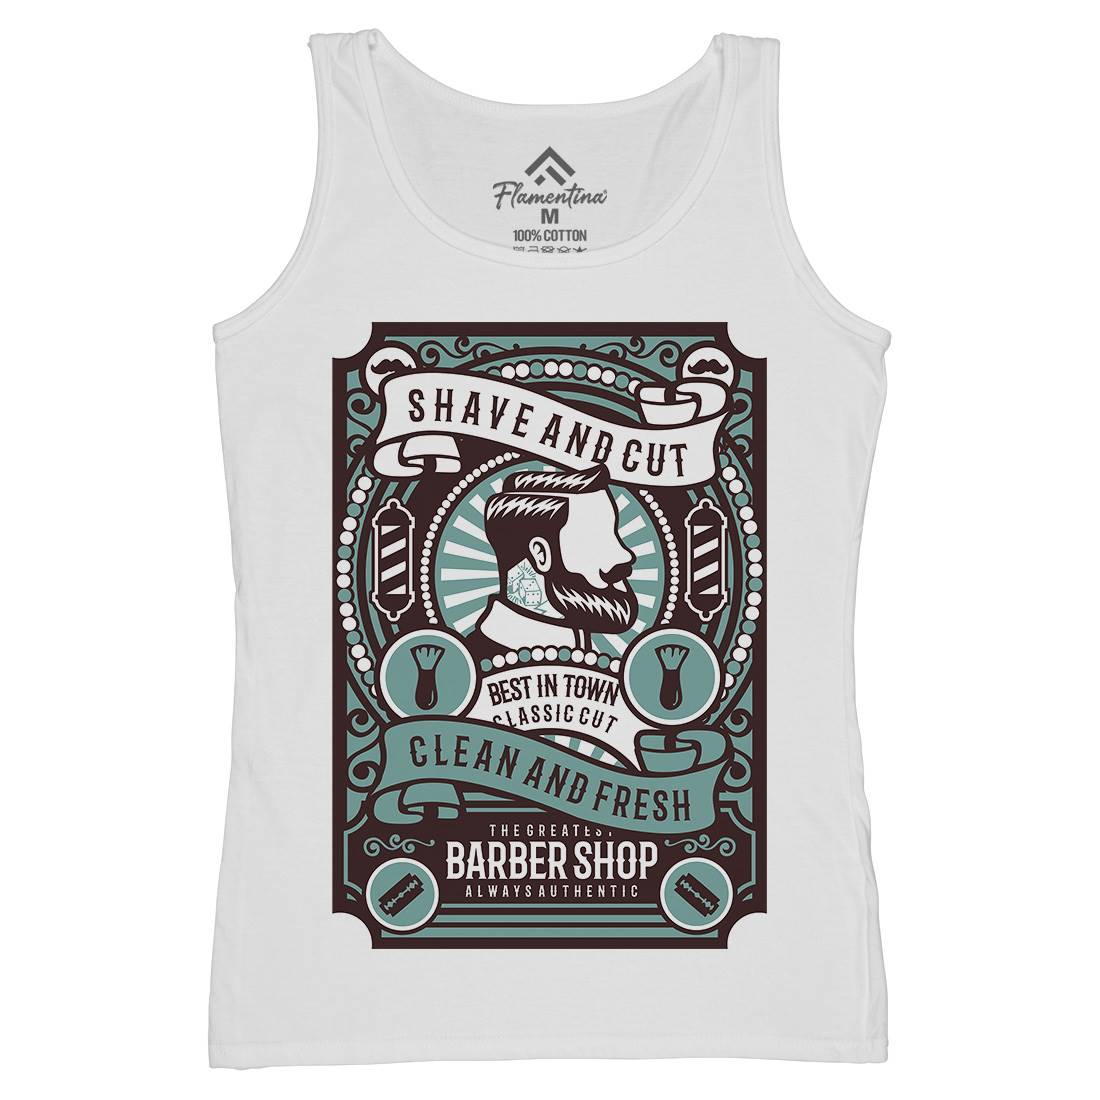 Shave And Cut Womens Organic Tank Top Vest Barber B254